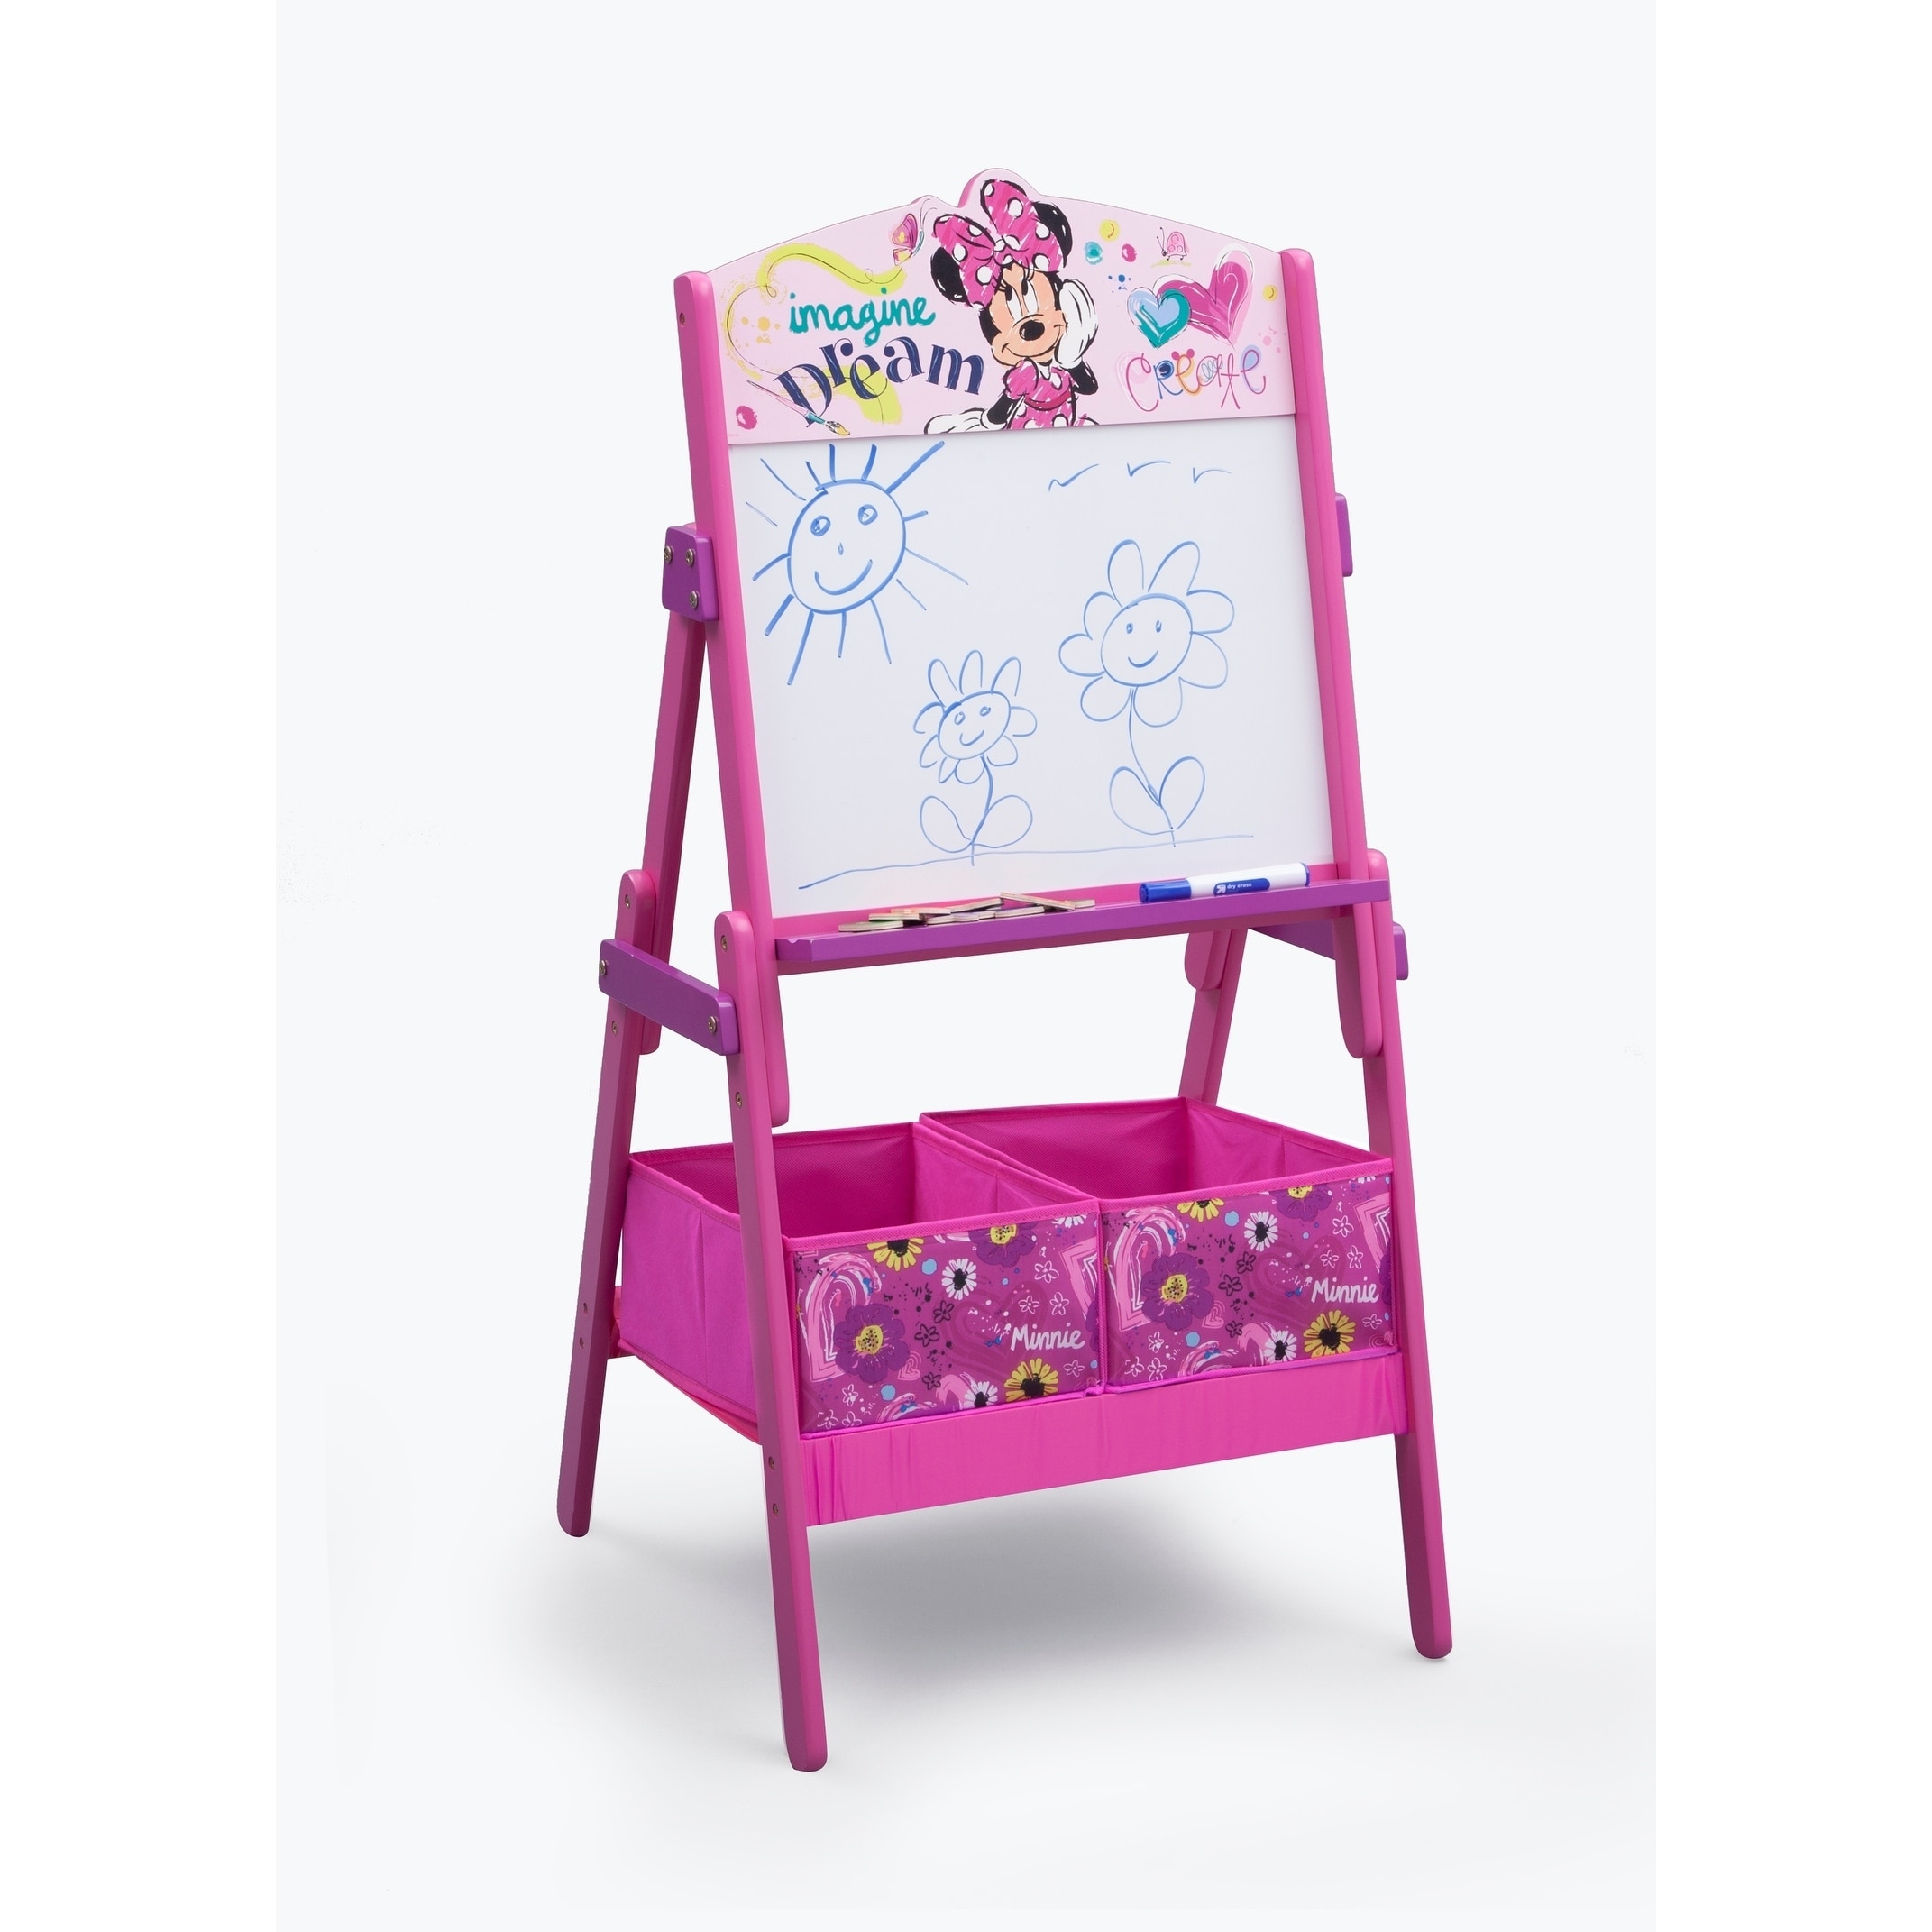 https://ak1.ostkcdn.com/images/products/17158920/Disney-Minnie-Mouse-Activity-Easel-with-Dry-Erase-Board-and-Magnetic-Letters-Multi-6c3dc296-fc23-485c-b82d-e54bc3631ccf.jpg